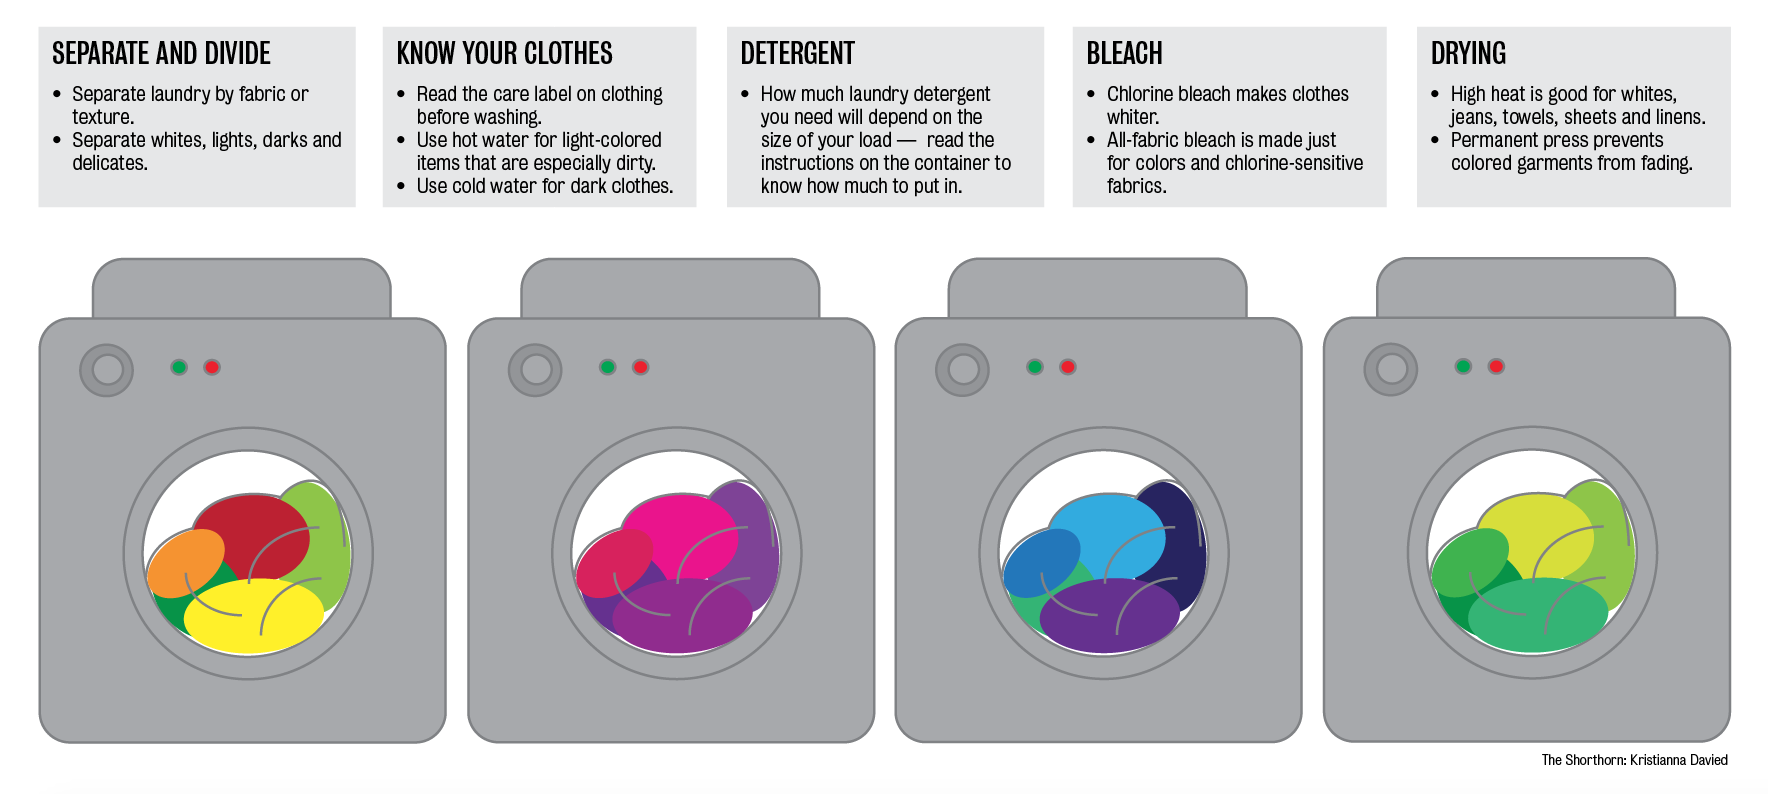 cold water for colored clothes